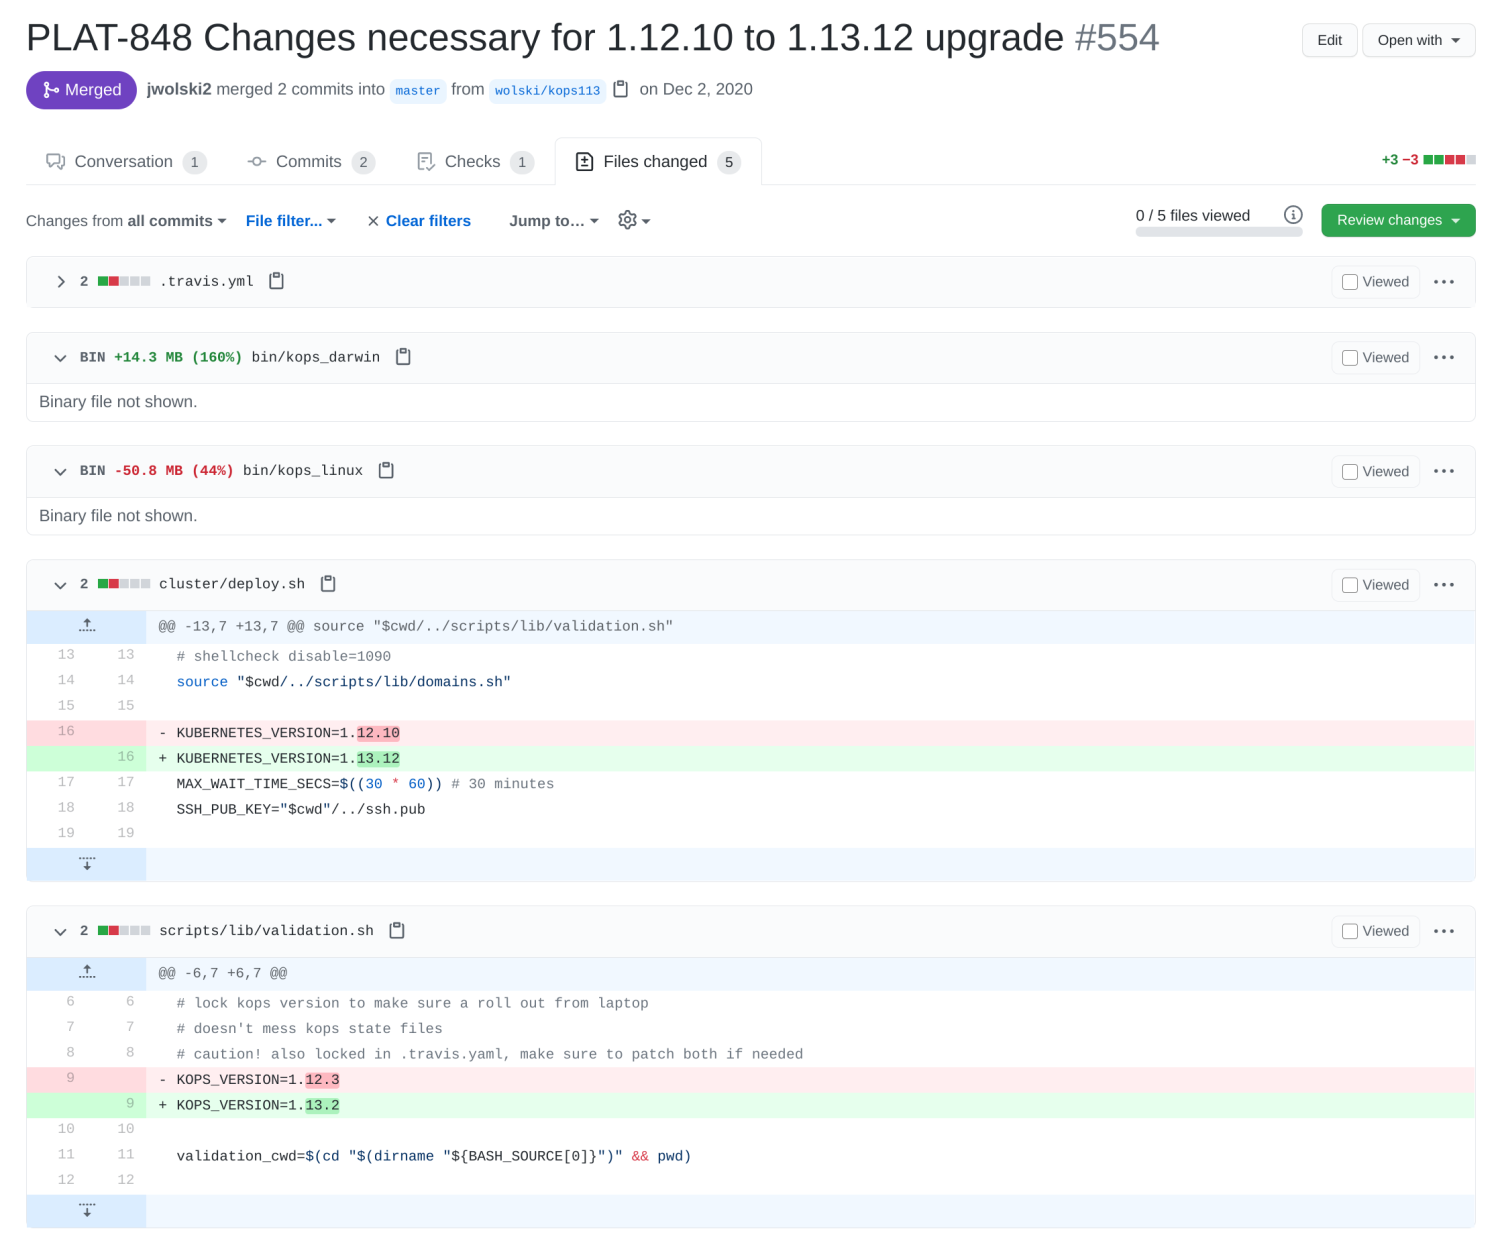 A pull requests to upgrade to 1.13.12.